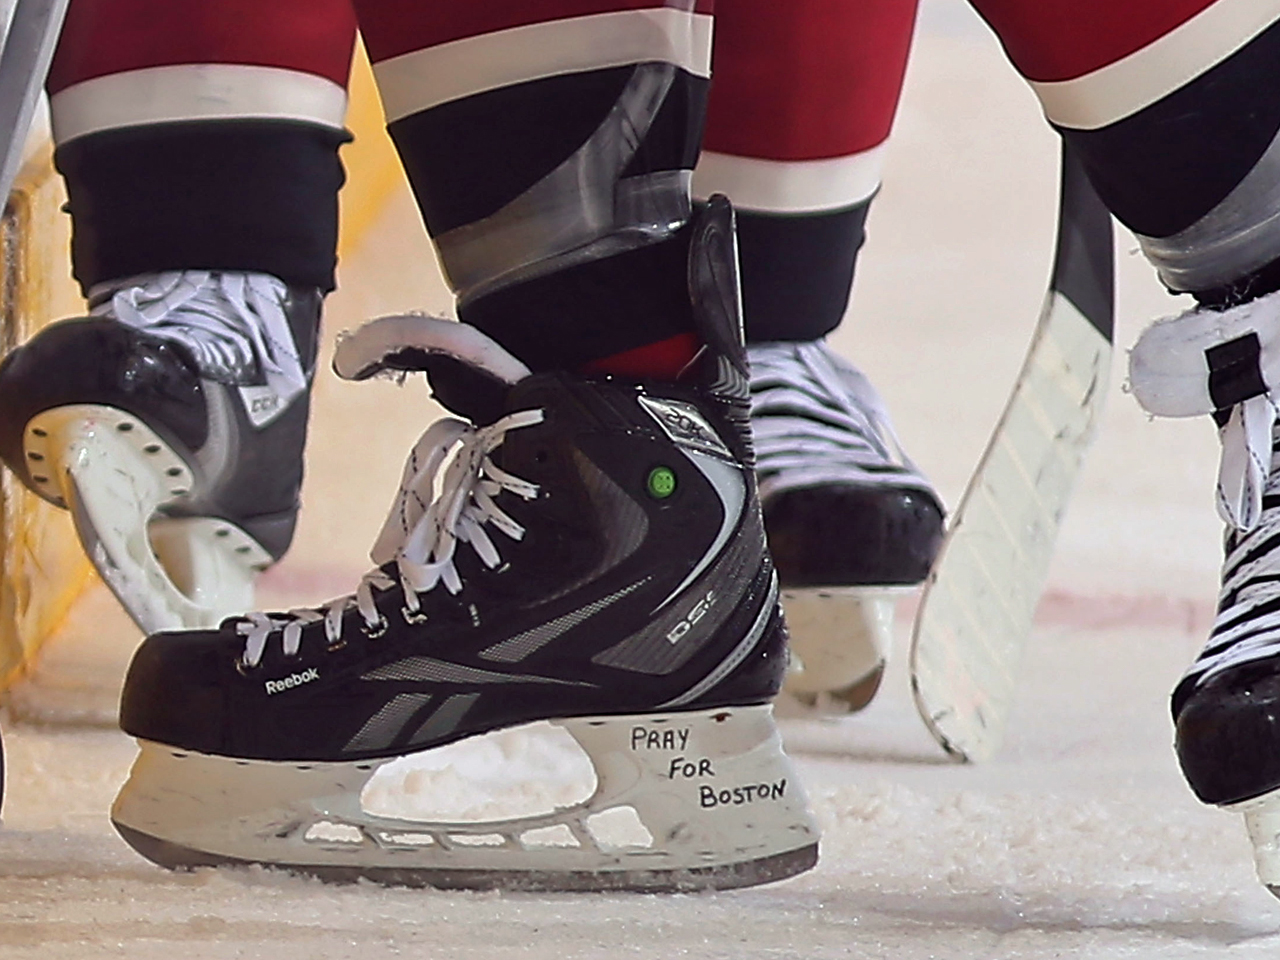 Keith Yandle's skate, had the words 